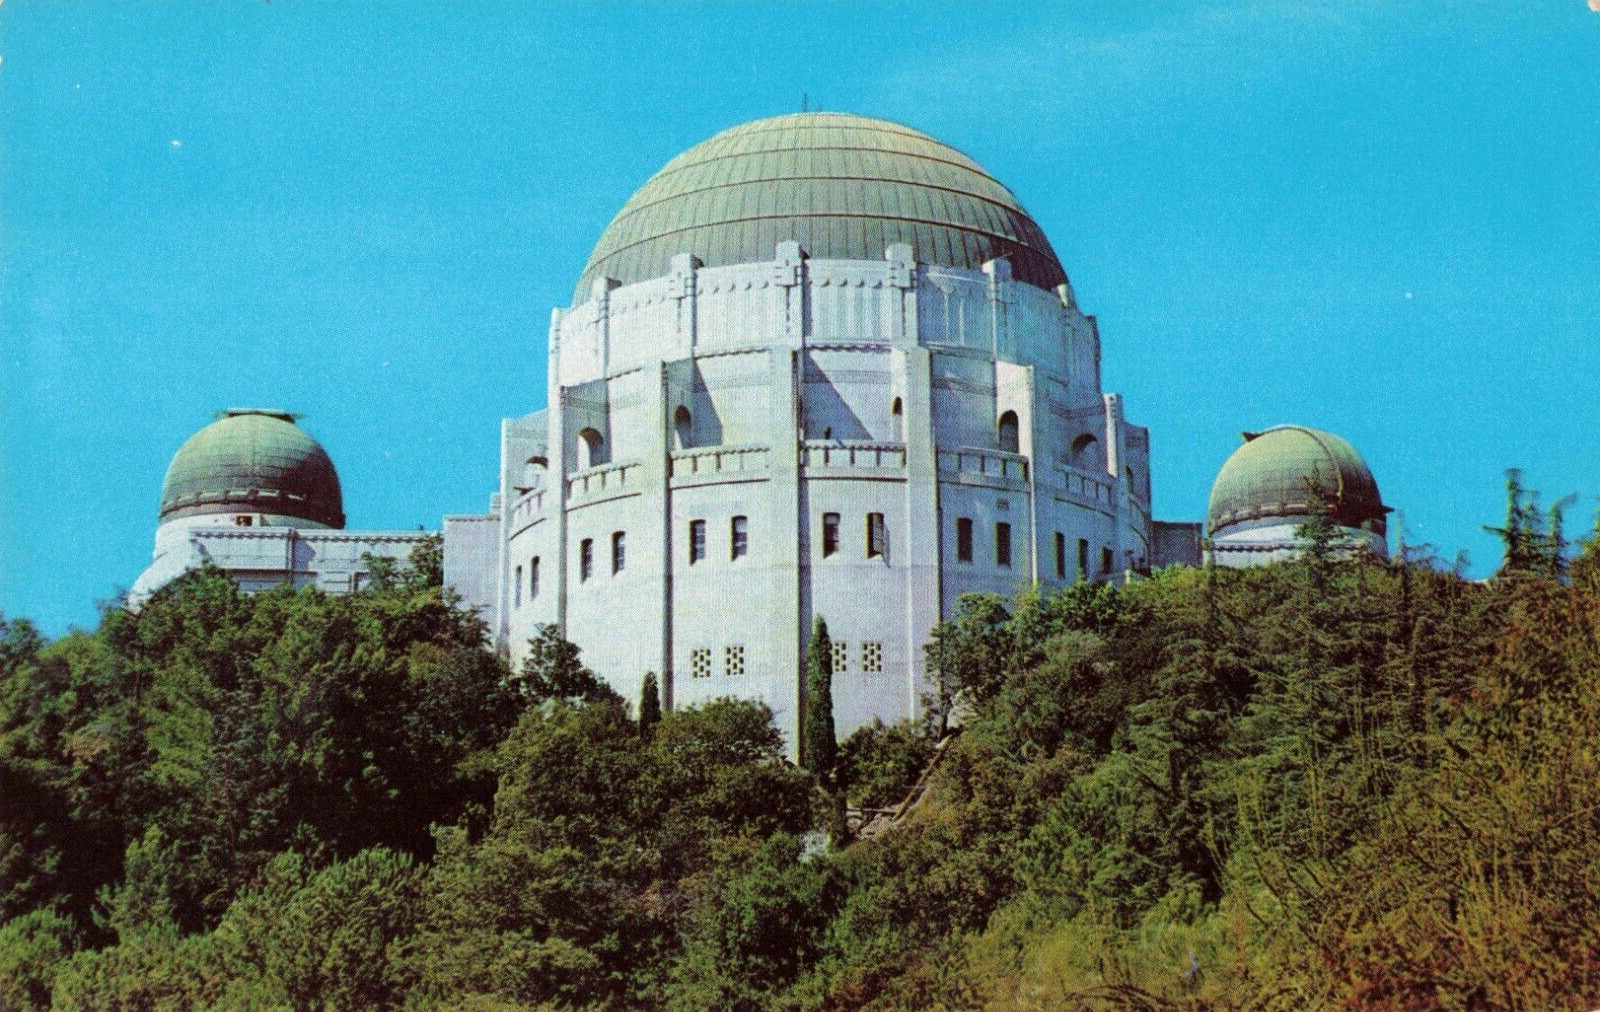 Los Angeles CA, Griffith Observatory, Solar Telescope Domes, Vintage Postcard